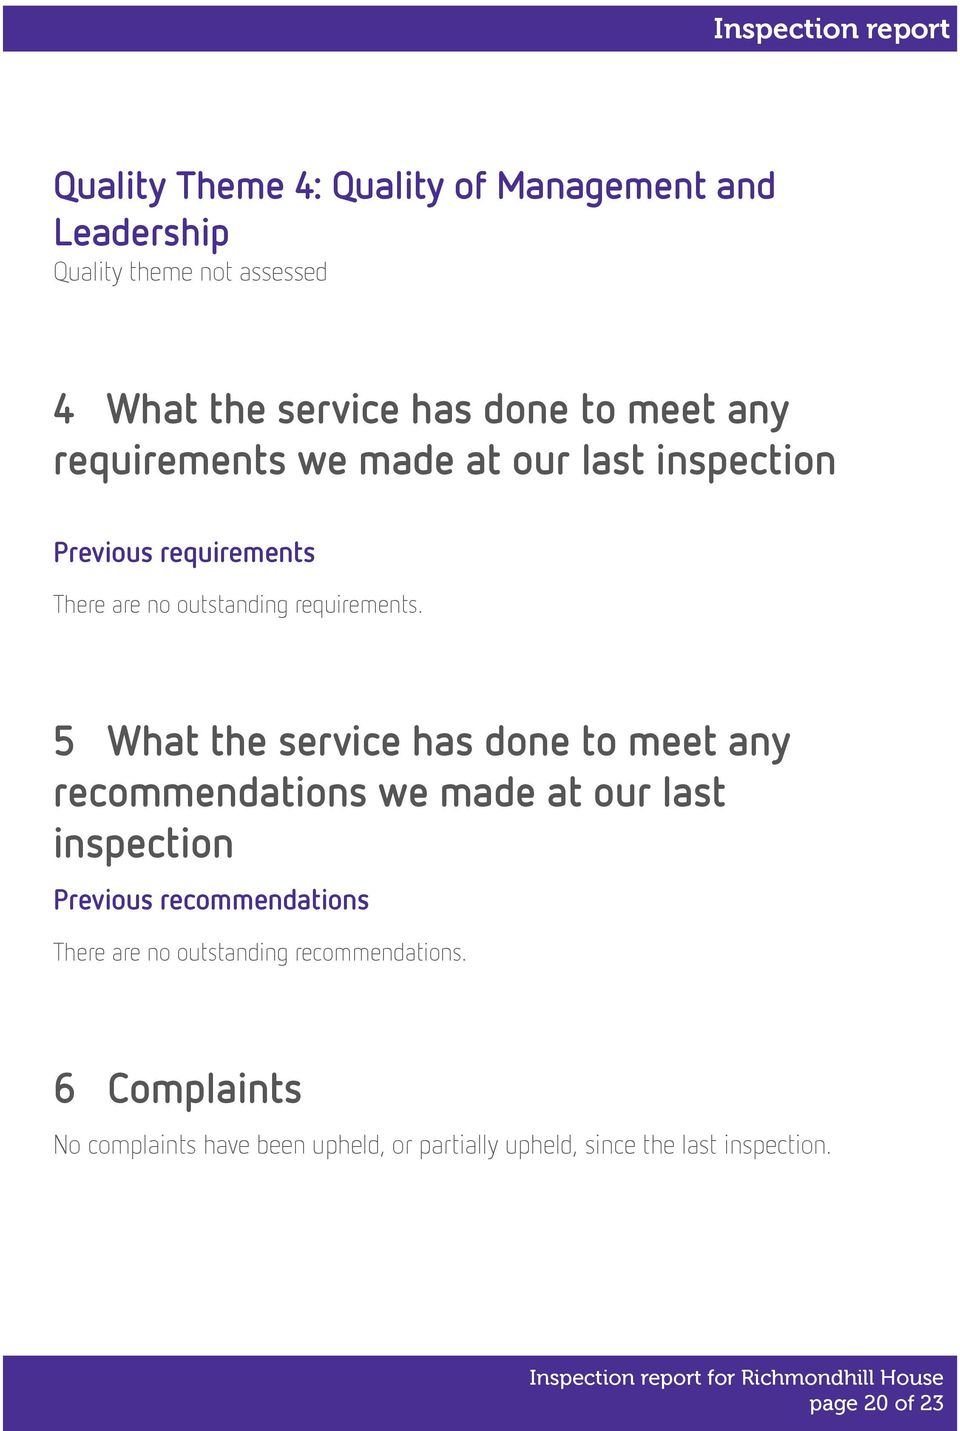 5 What the service has done to meet any recommendations we made at our last inspection Previous recommendations There are